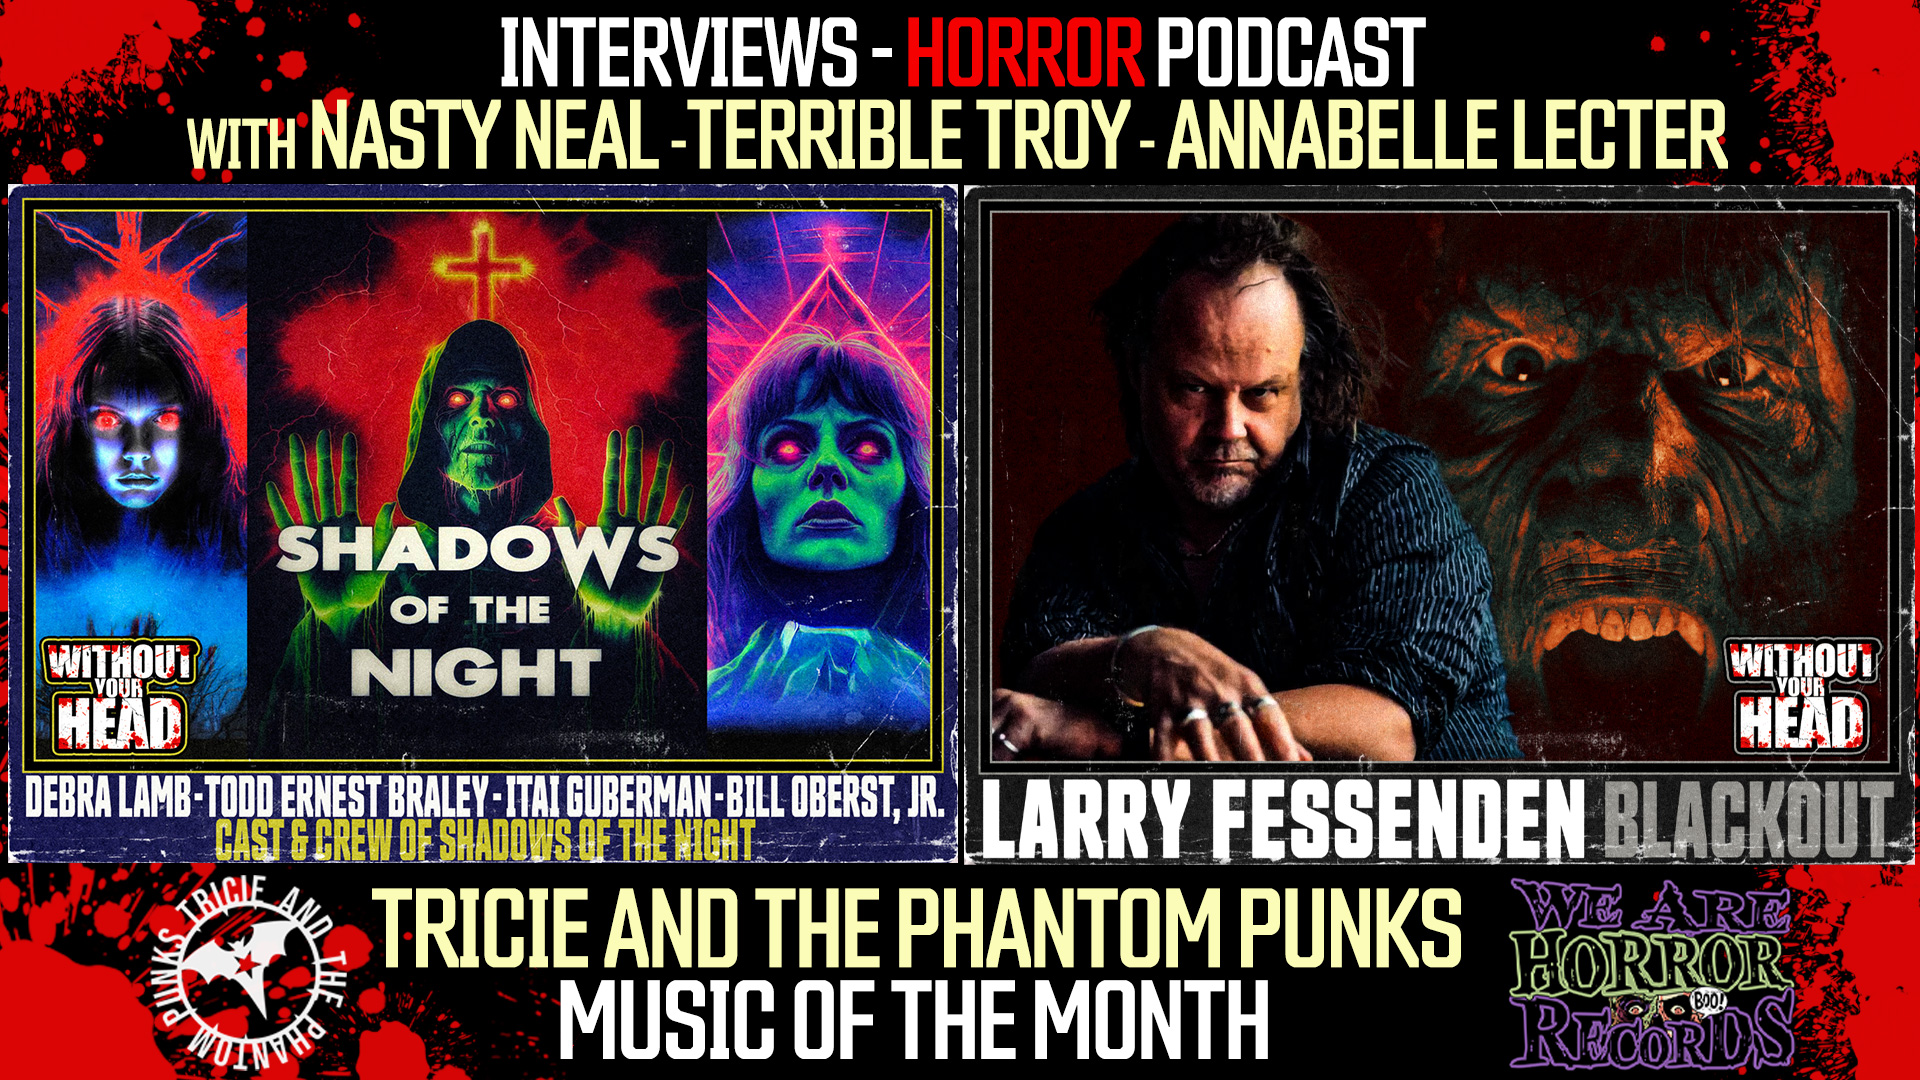 Shadows of The Night and Larry Fessenden